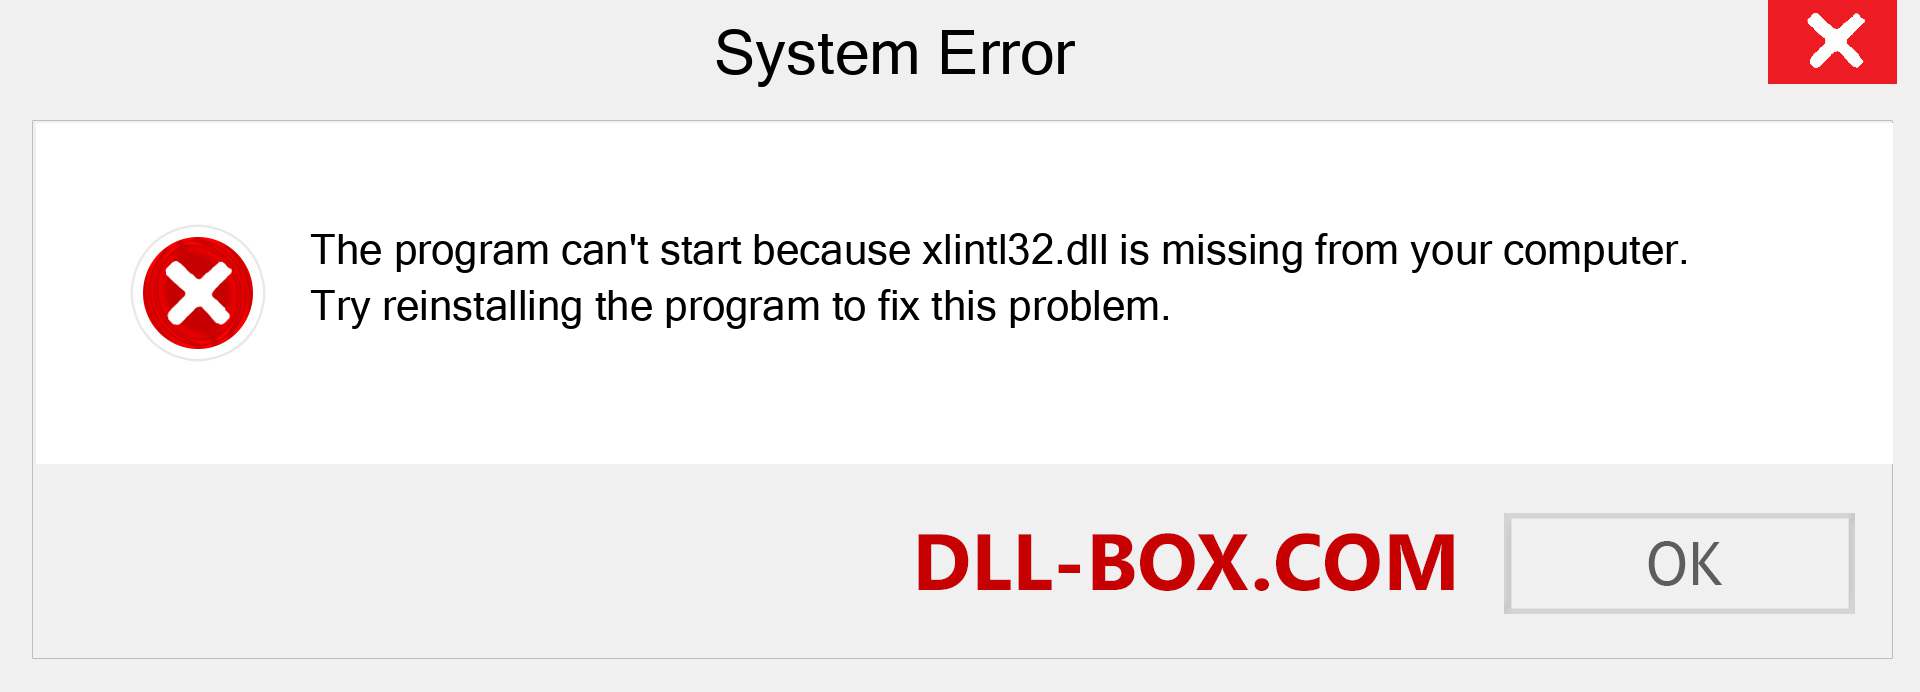  xlintl32.dll file is missing?. Download for Windows 7, 8, 10 - Fix  xlintl32 dll Missing Error on Windows, photos, images